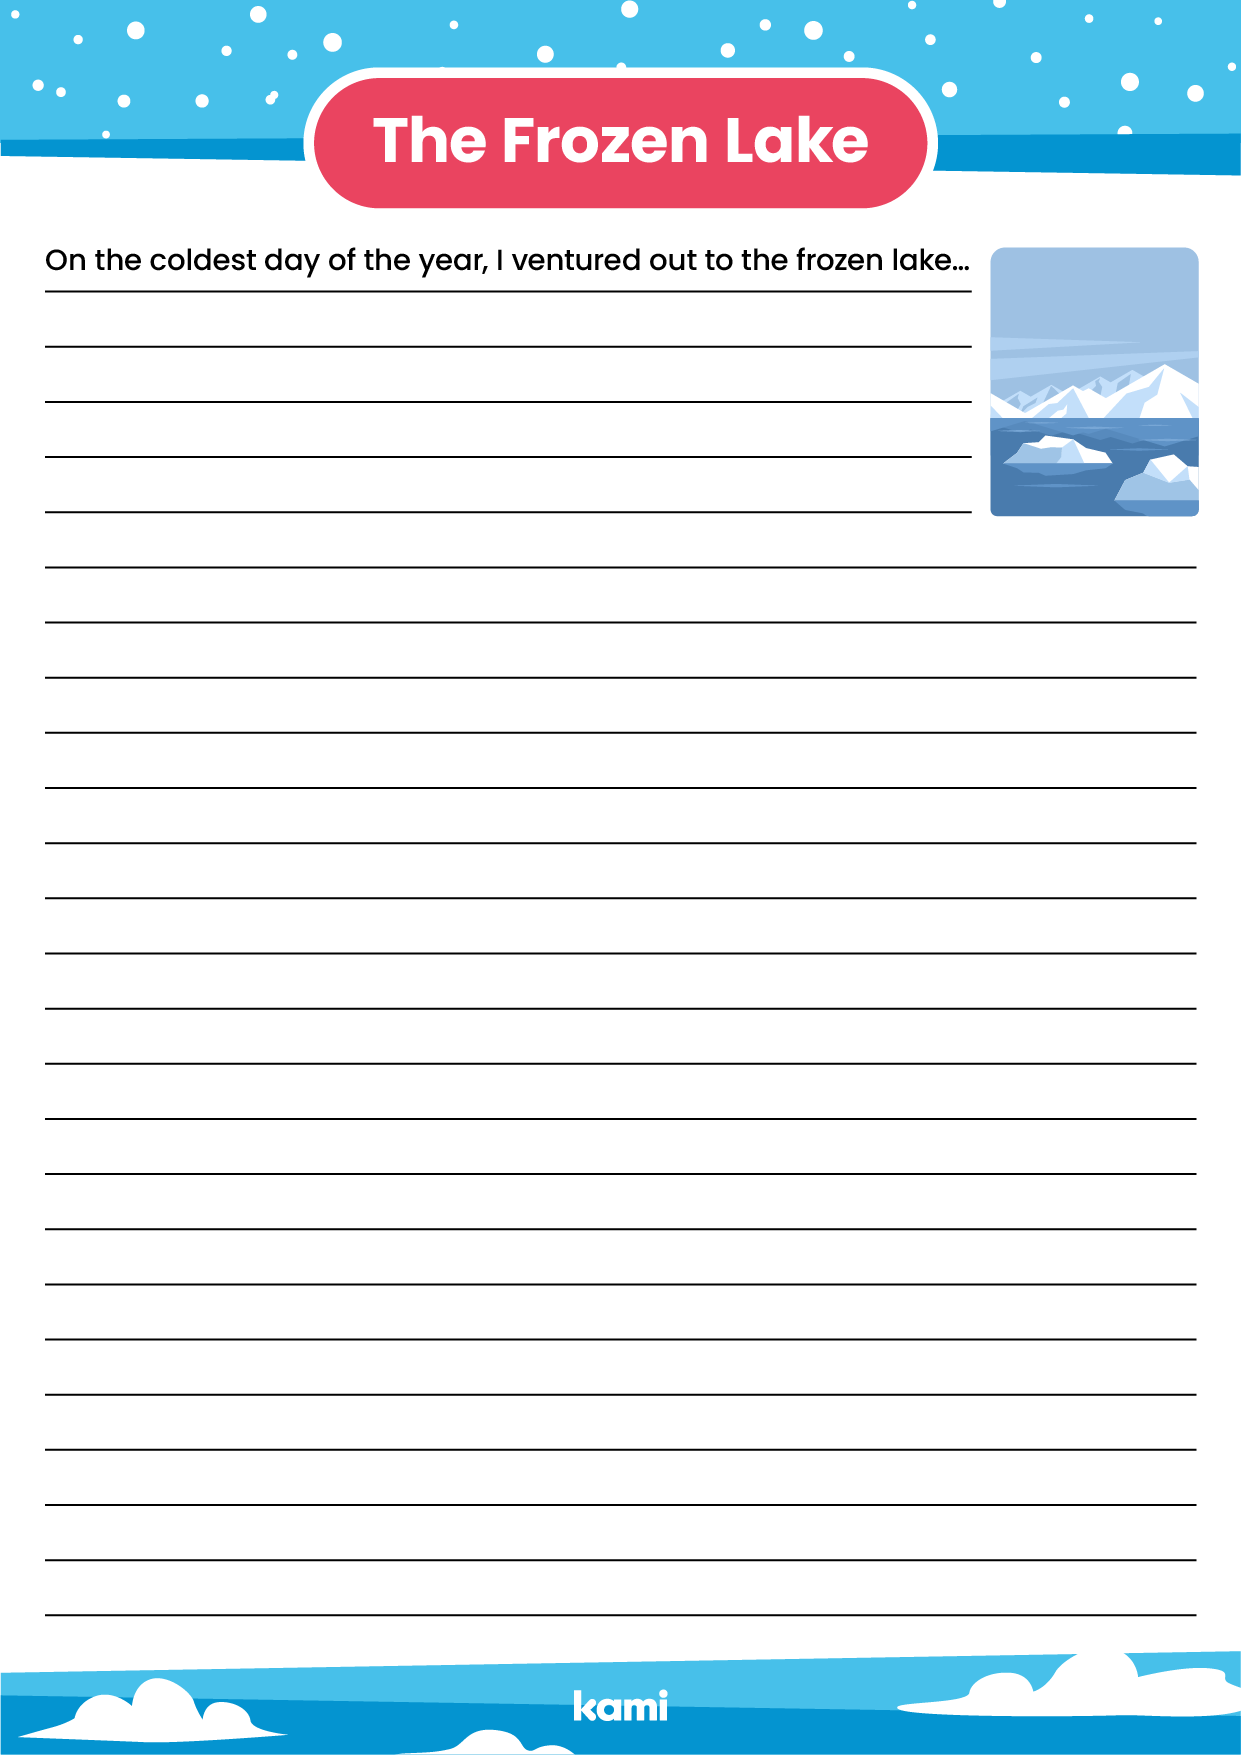 A worksheet for writing with a winter theme.